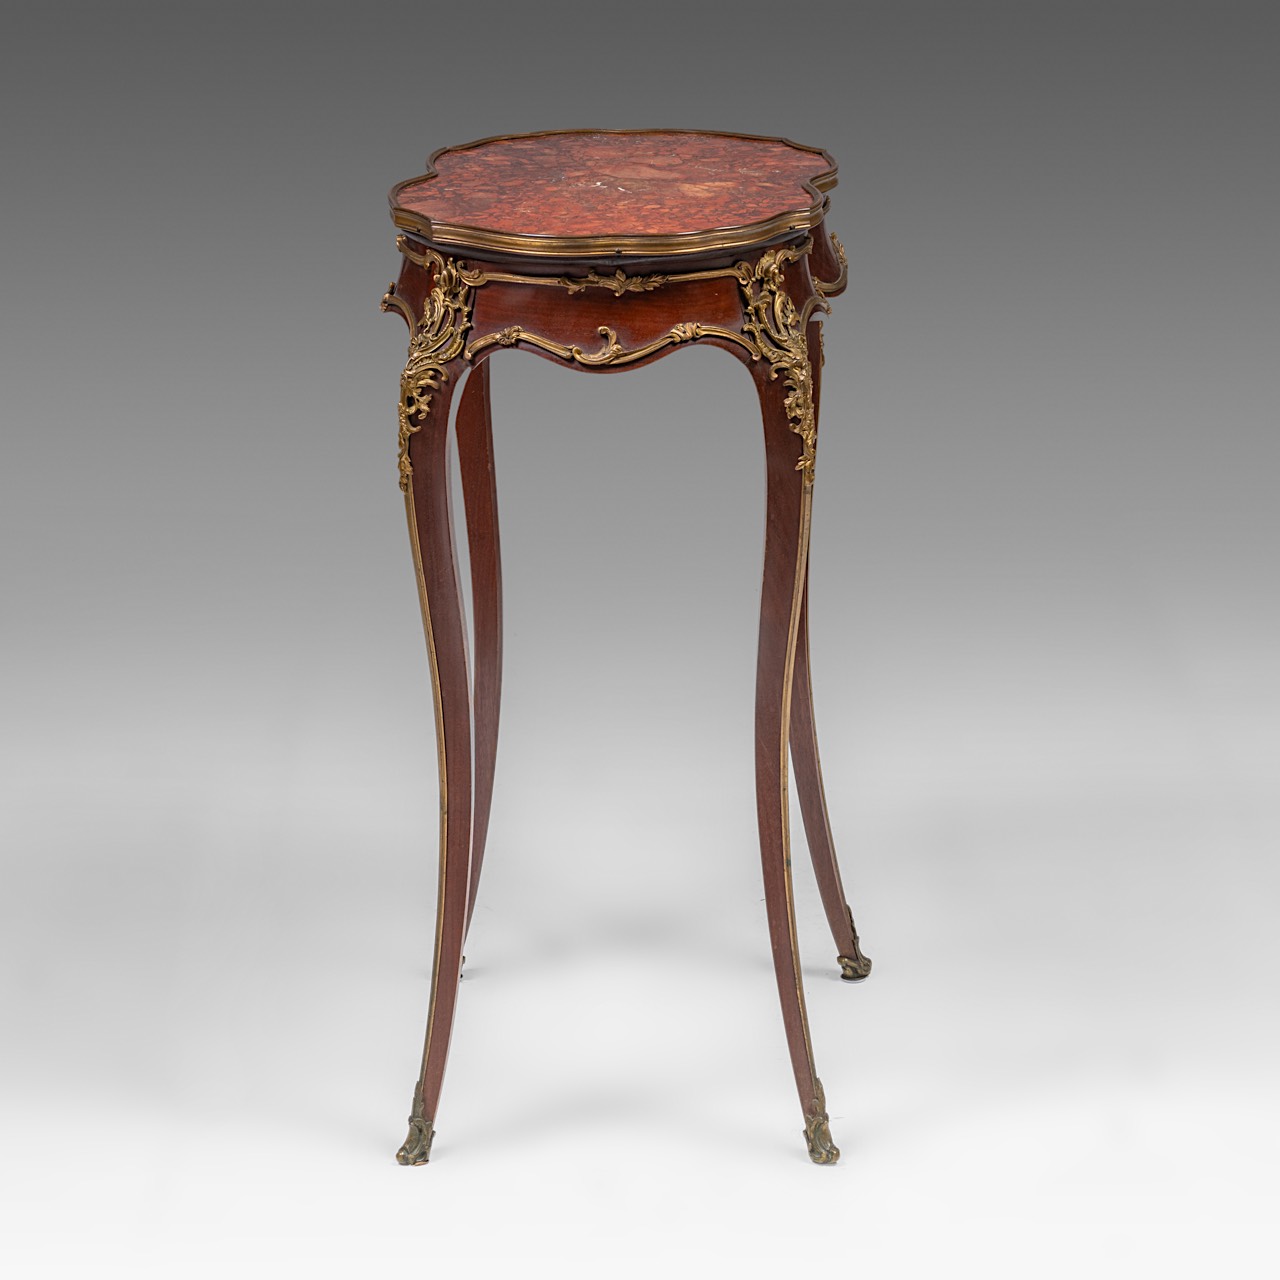 A mahogany marble-topped Louis XV (1723-1774) occasional table with gilt bronze mounts, H 77,5 cm - - Image 5 of 9